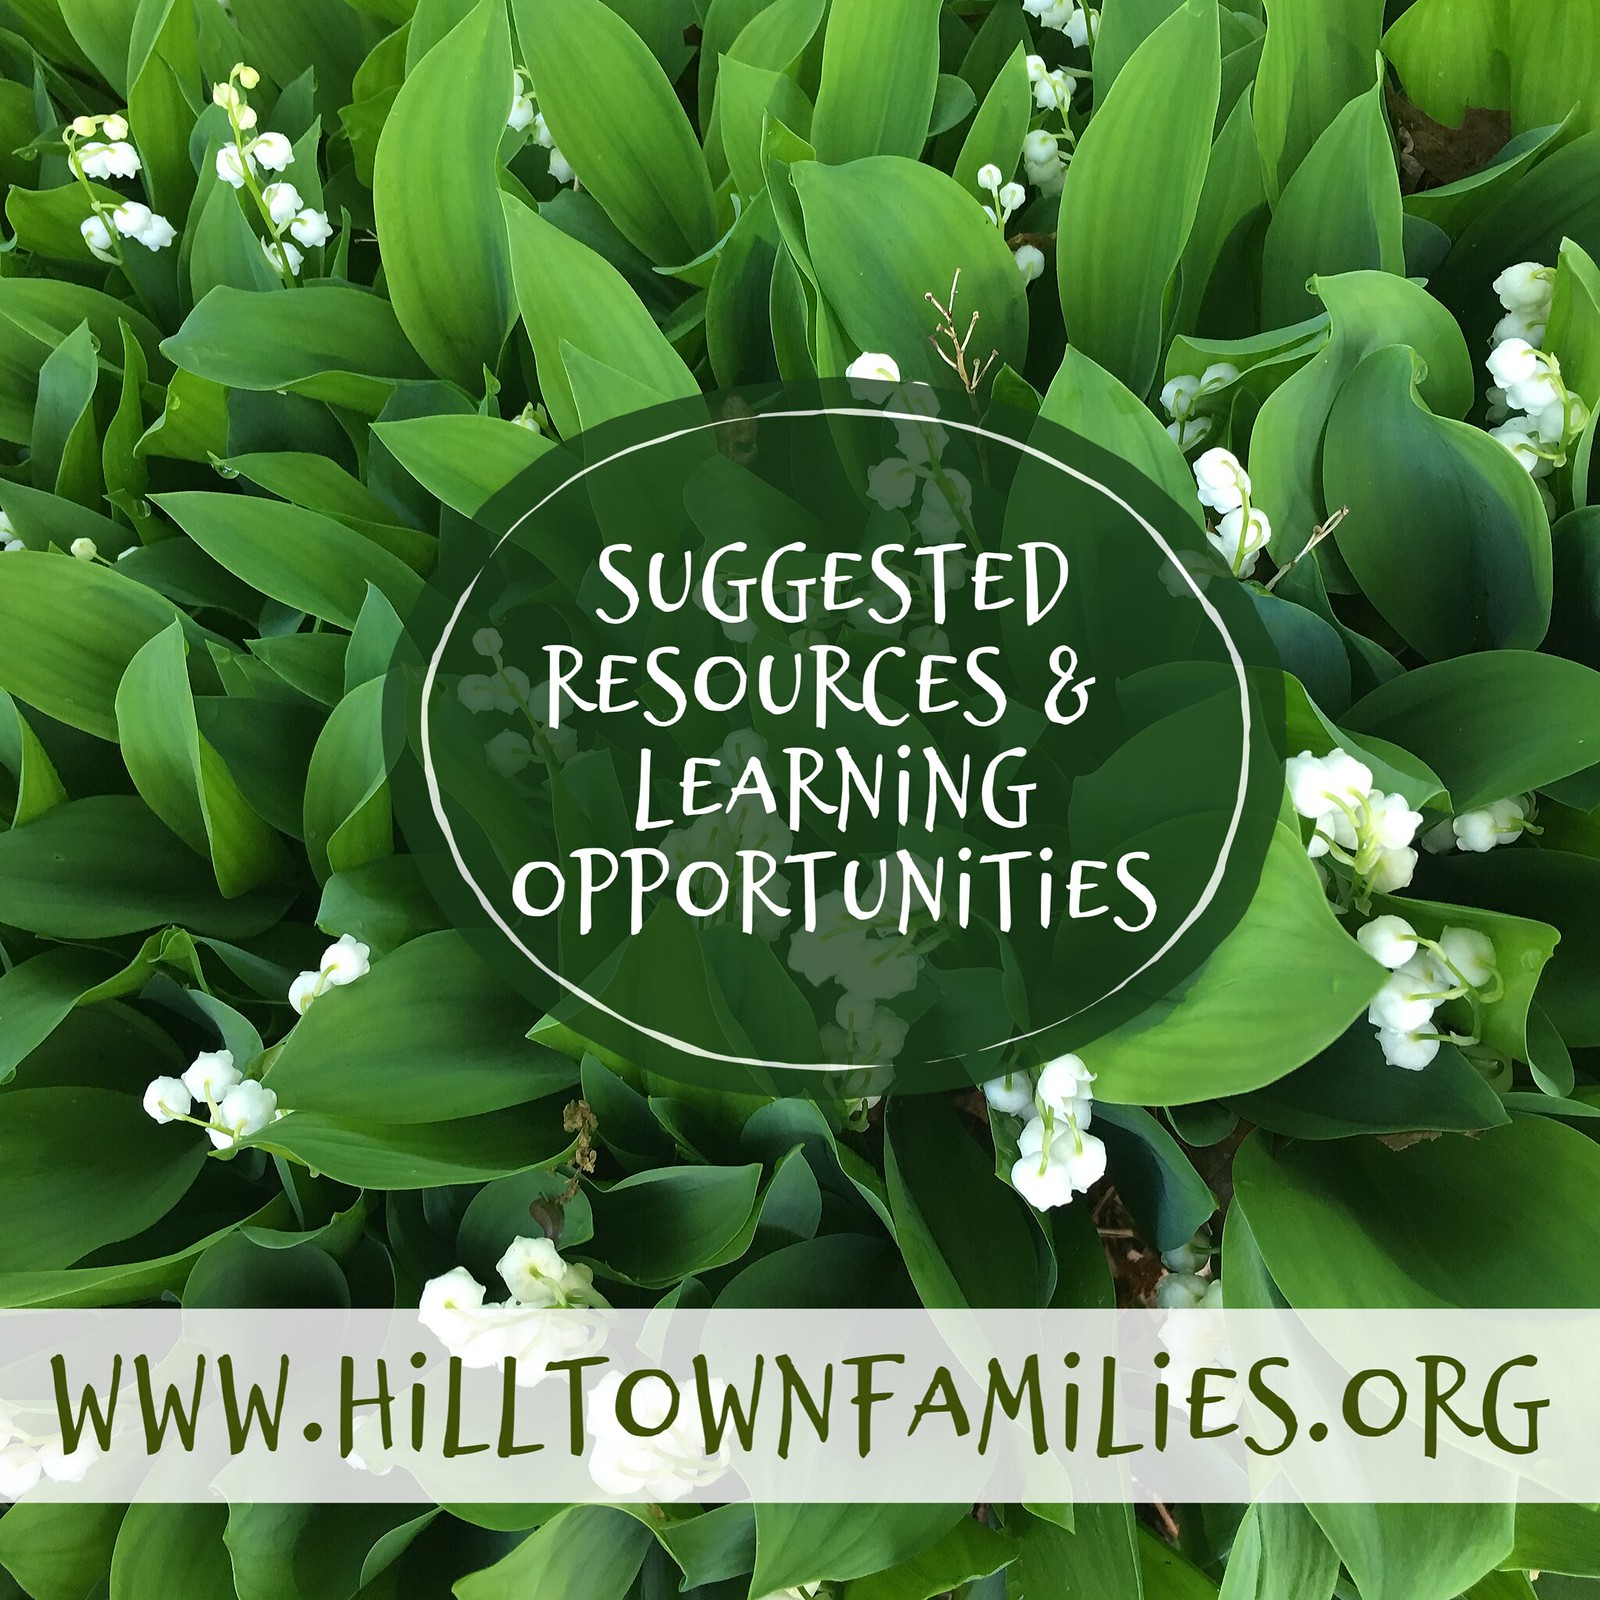 Over 100 smart things to do in western Massachusetts and online learning opportunities for mid-May for everyone in your family!